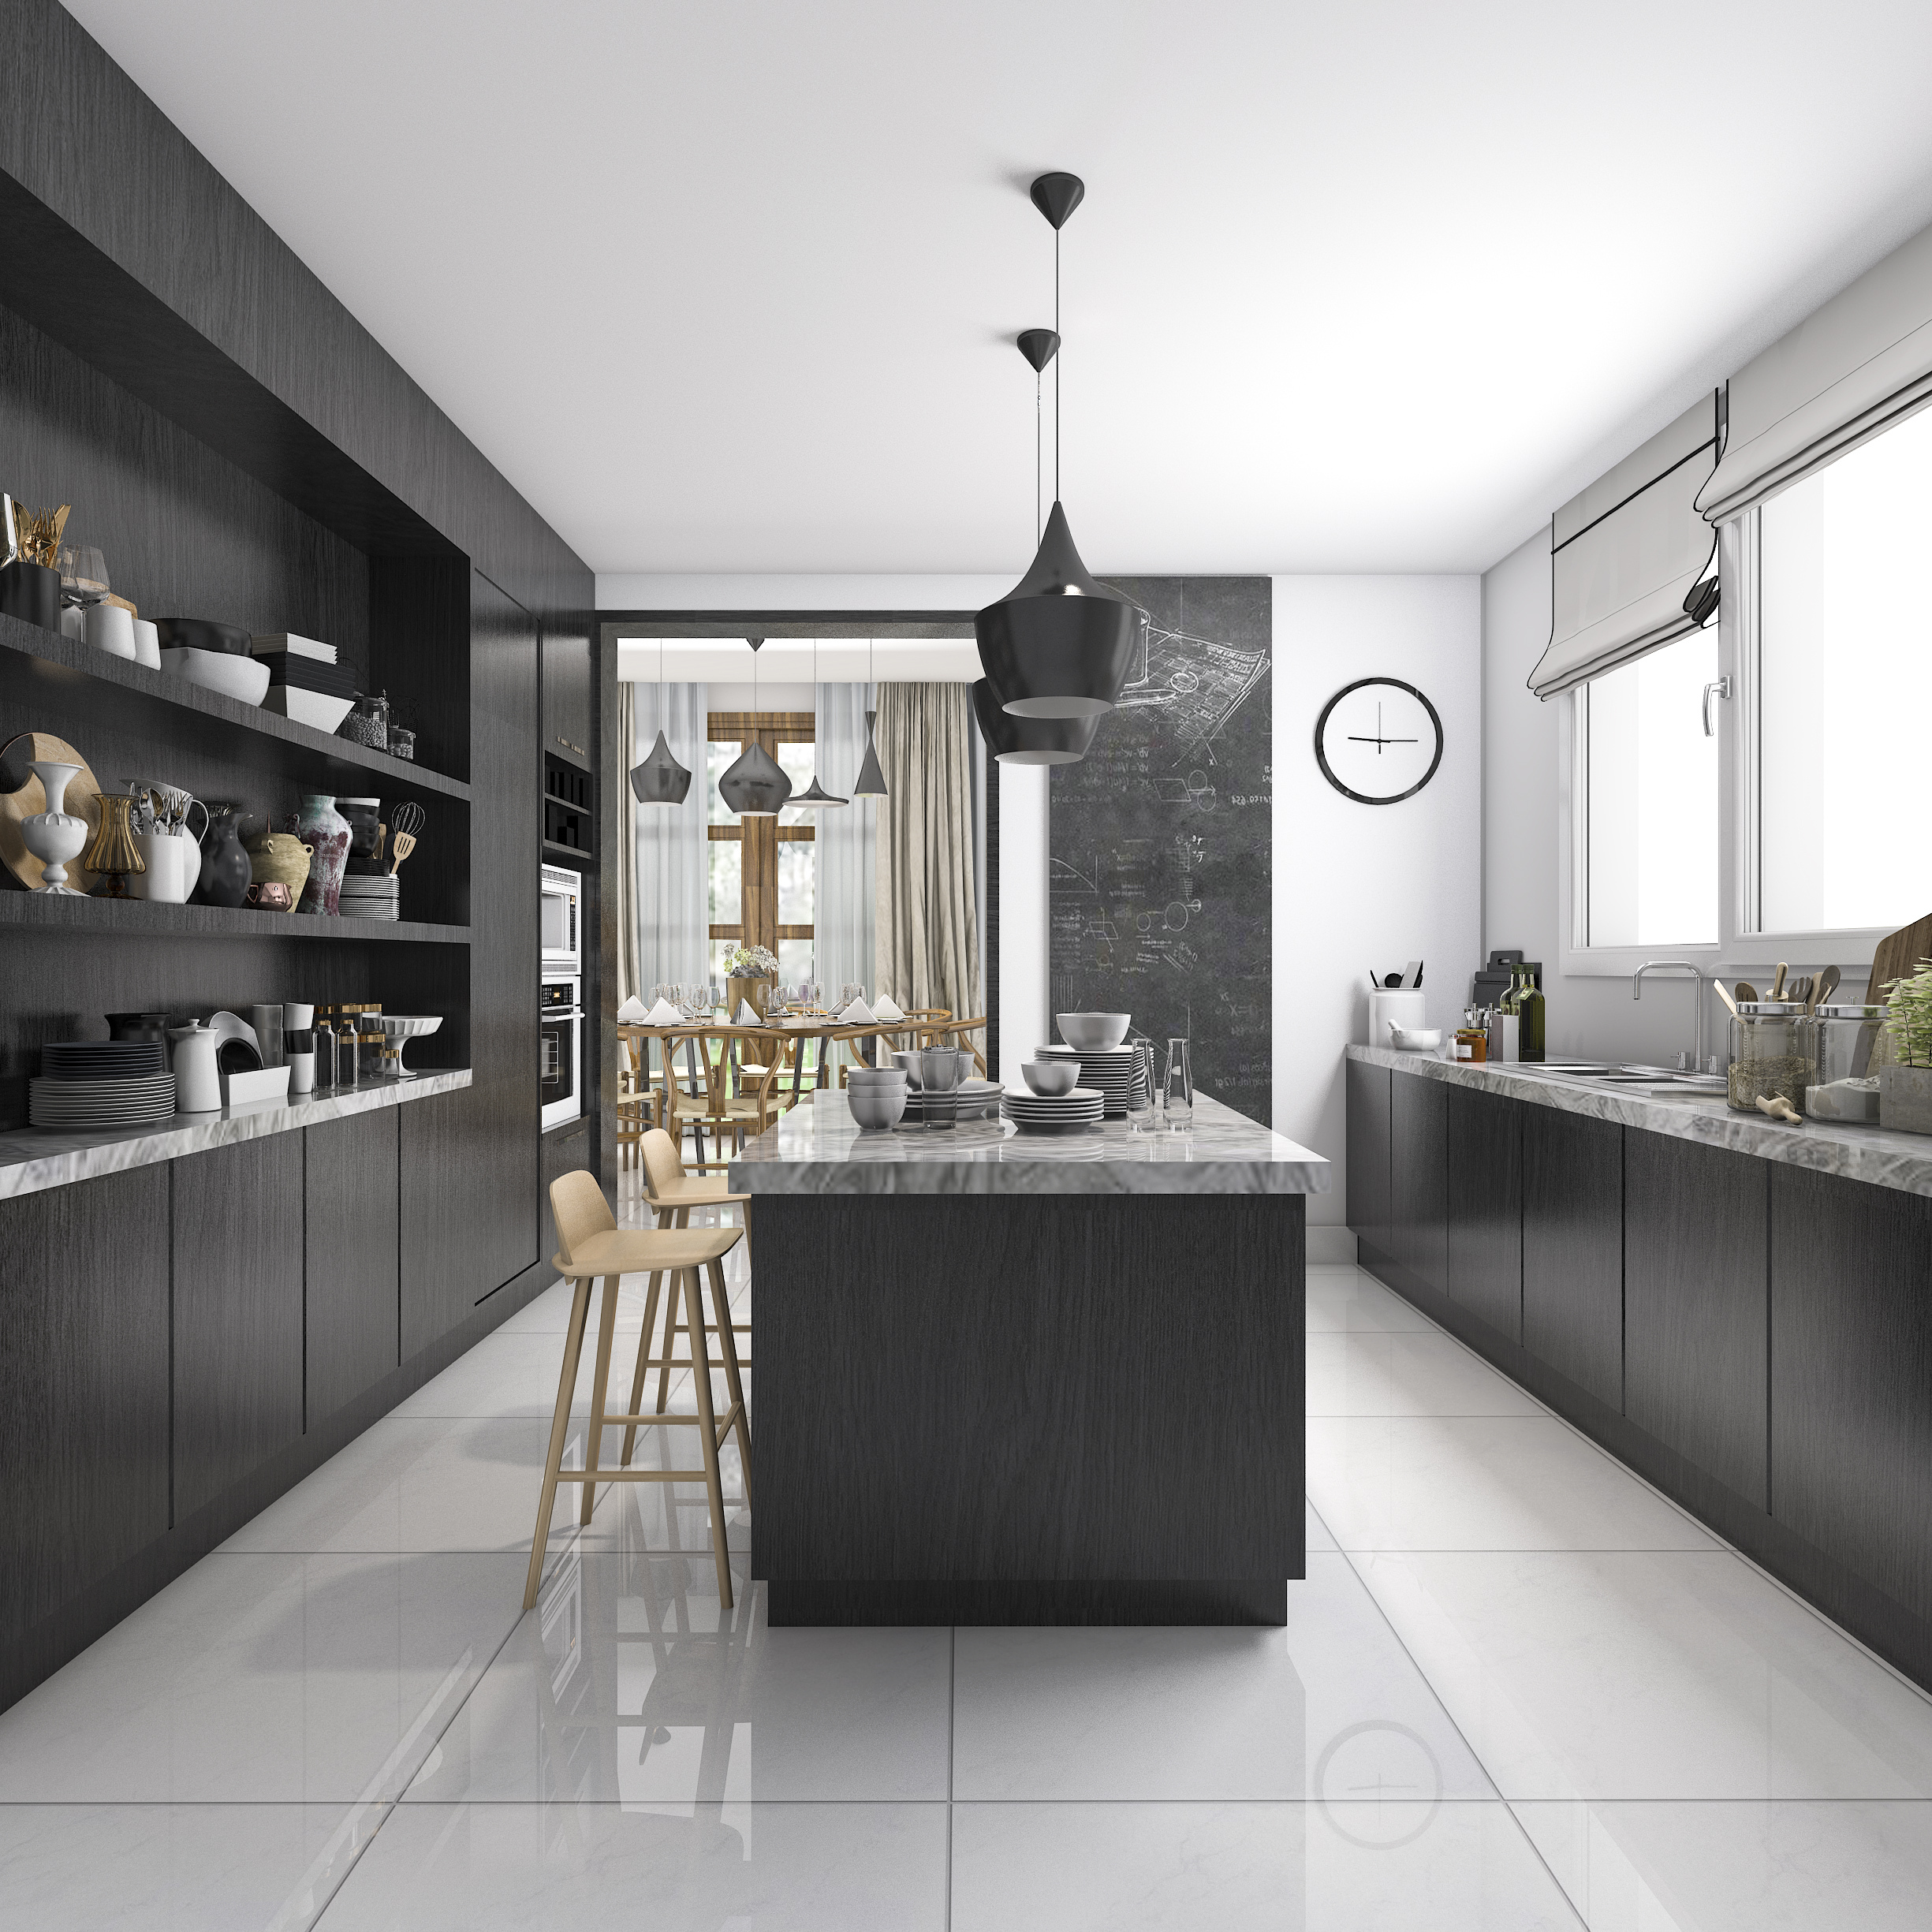 See your kitchen in 3D!